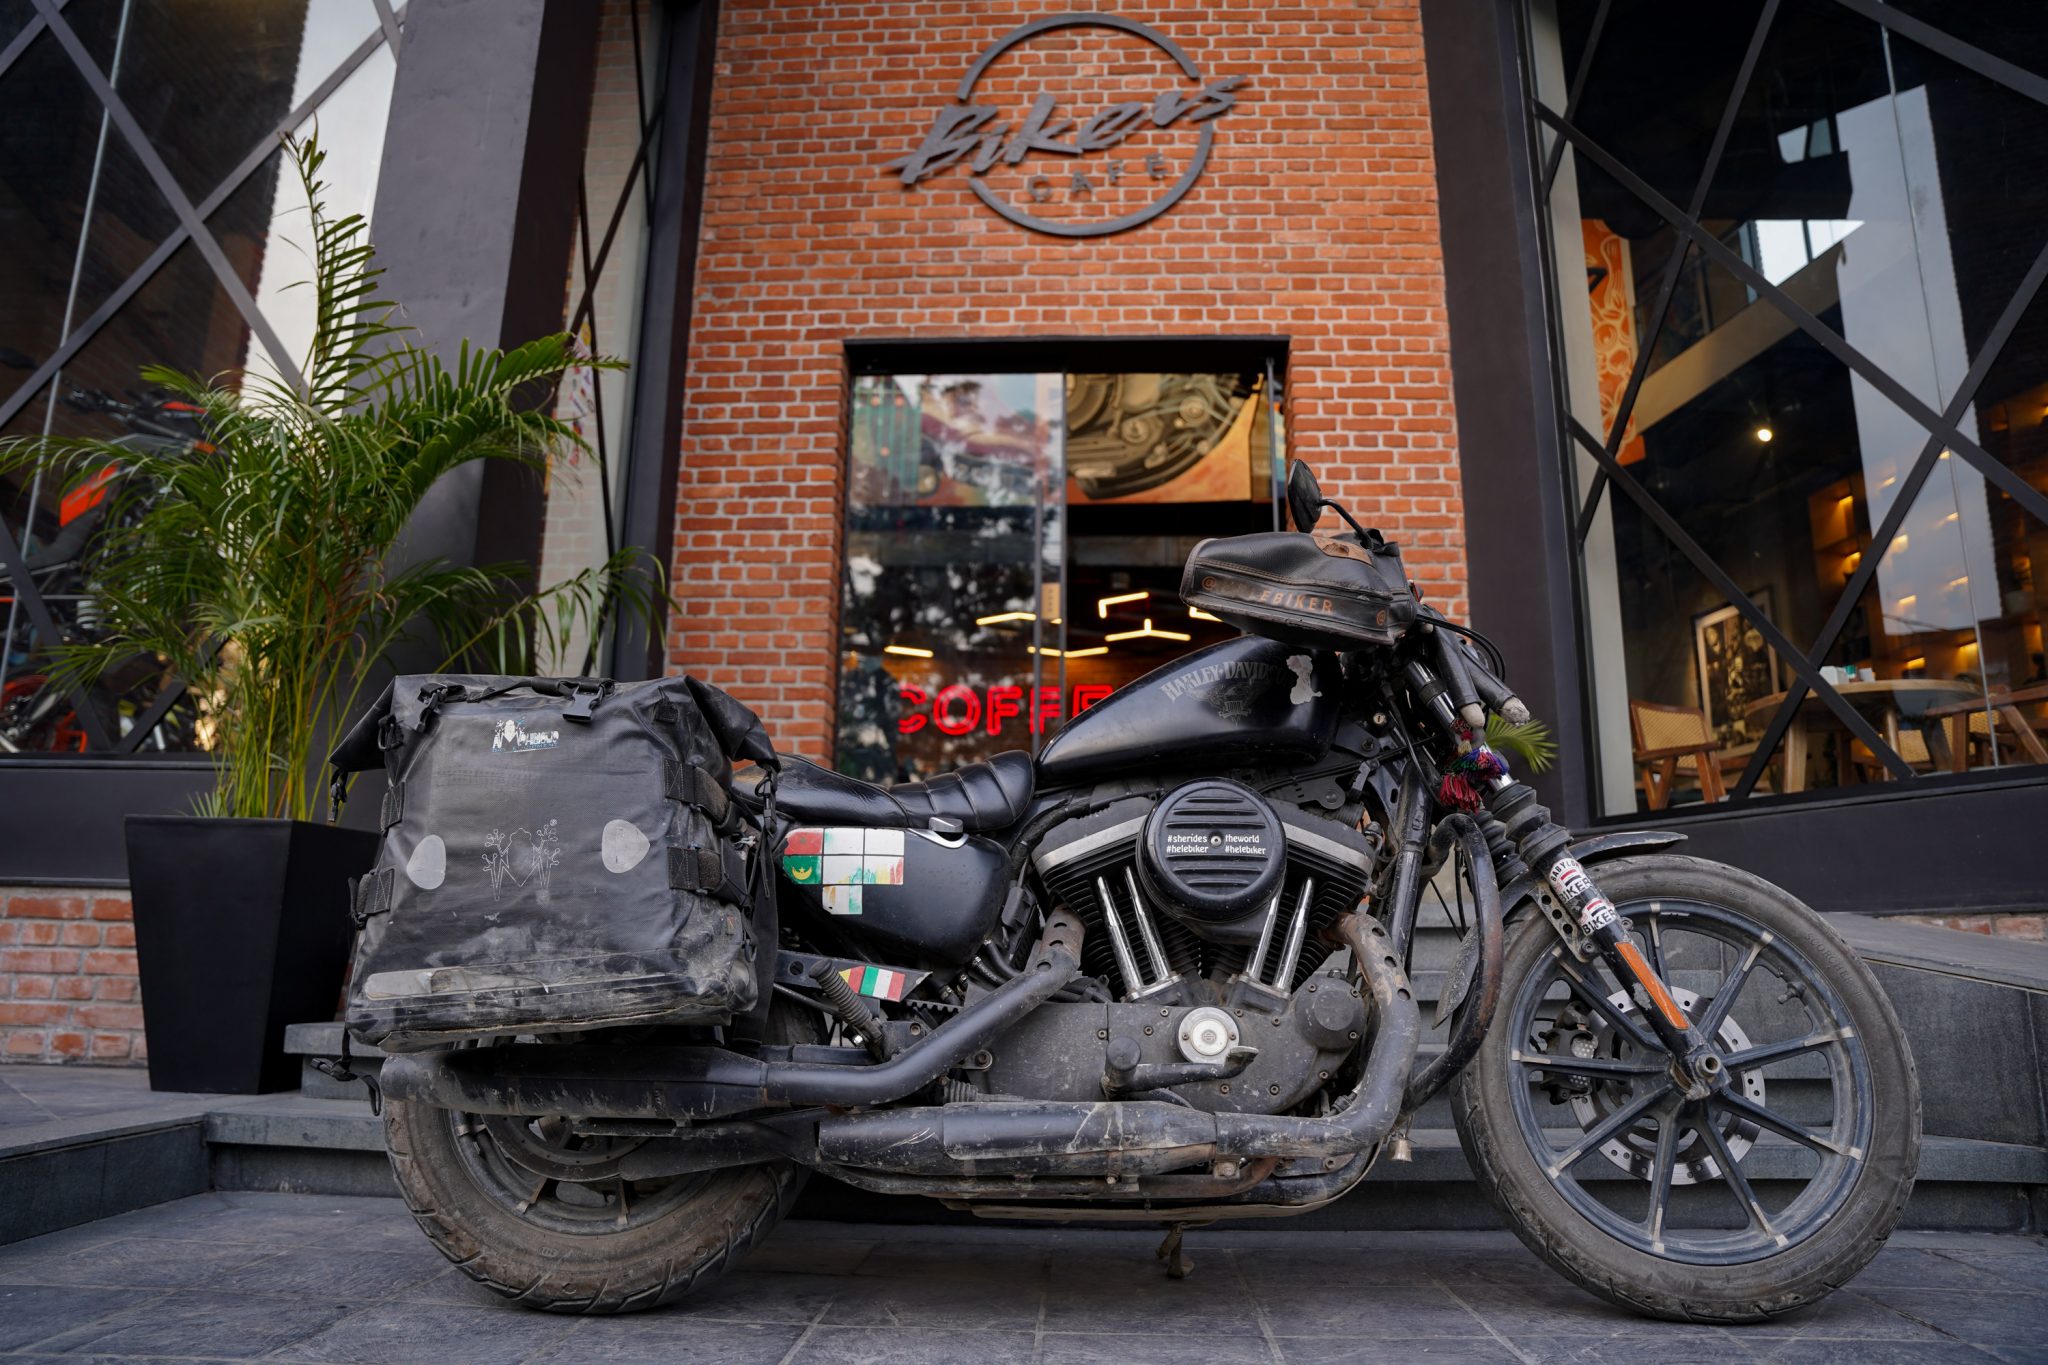 Bikers Cafe: Where motorbike enthusiasts unite for more than coffee